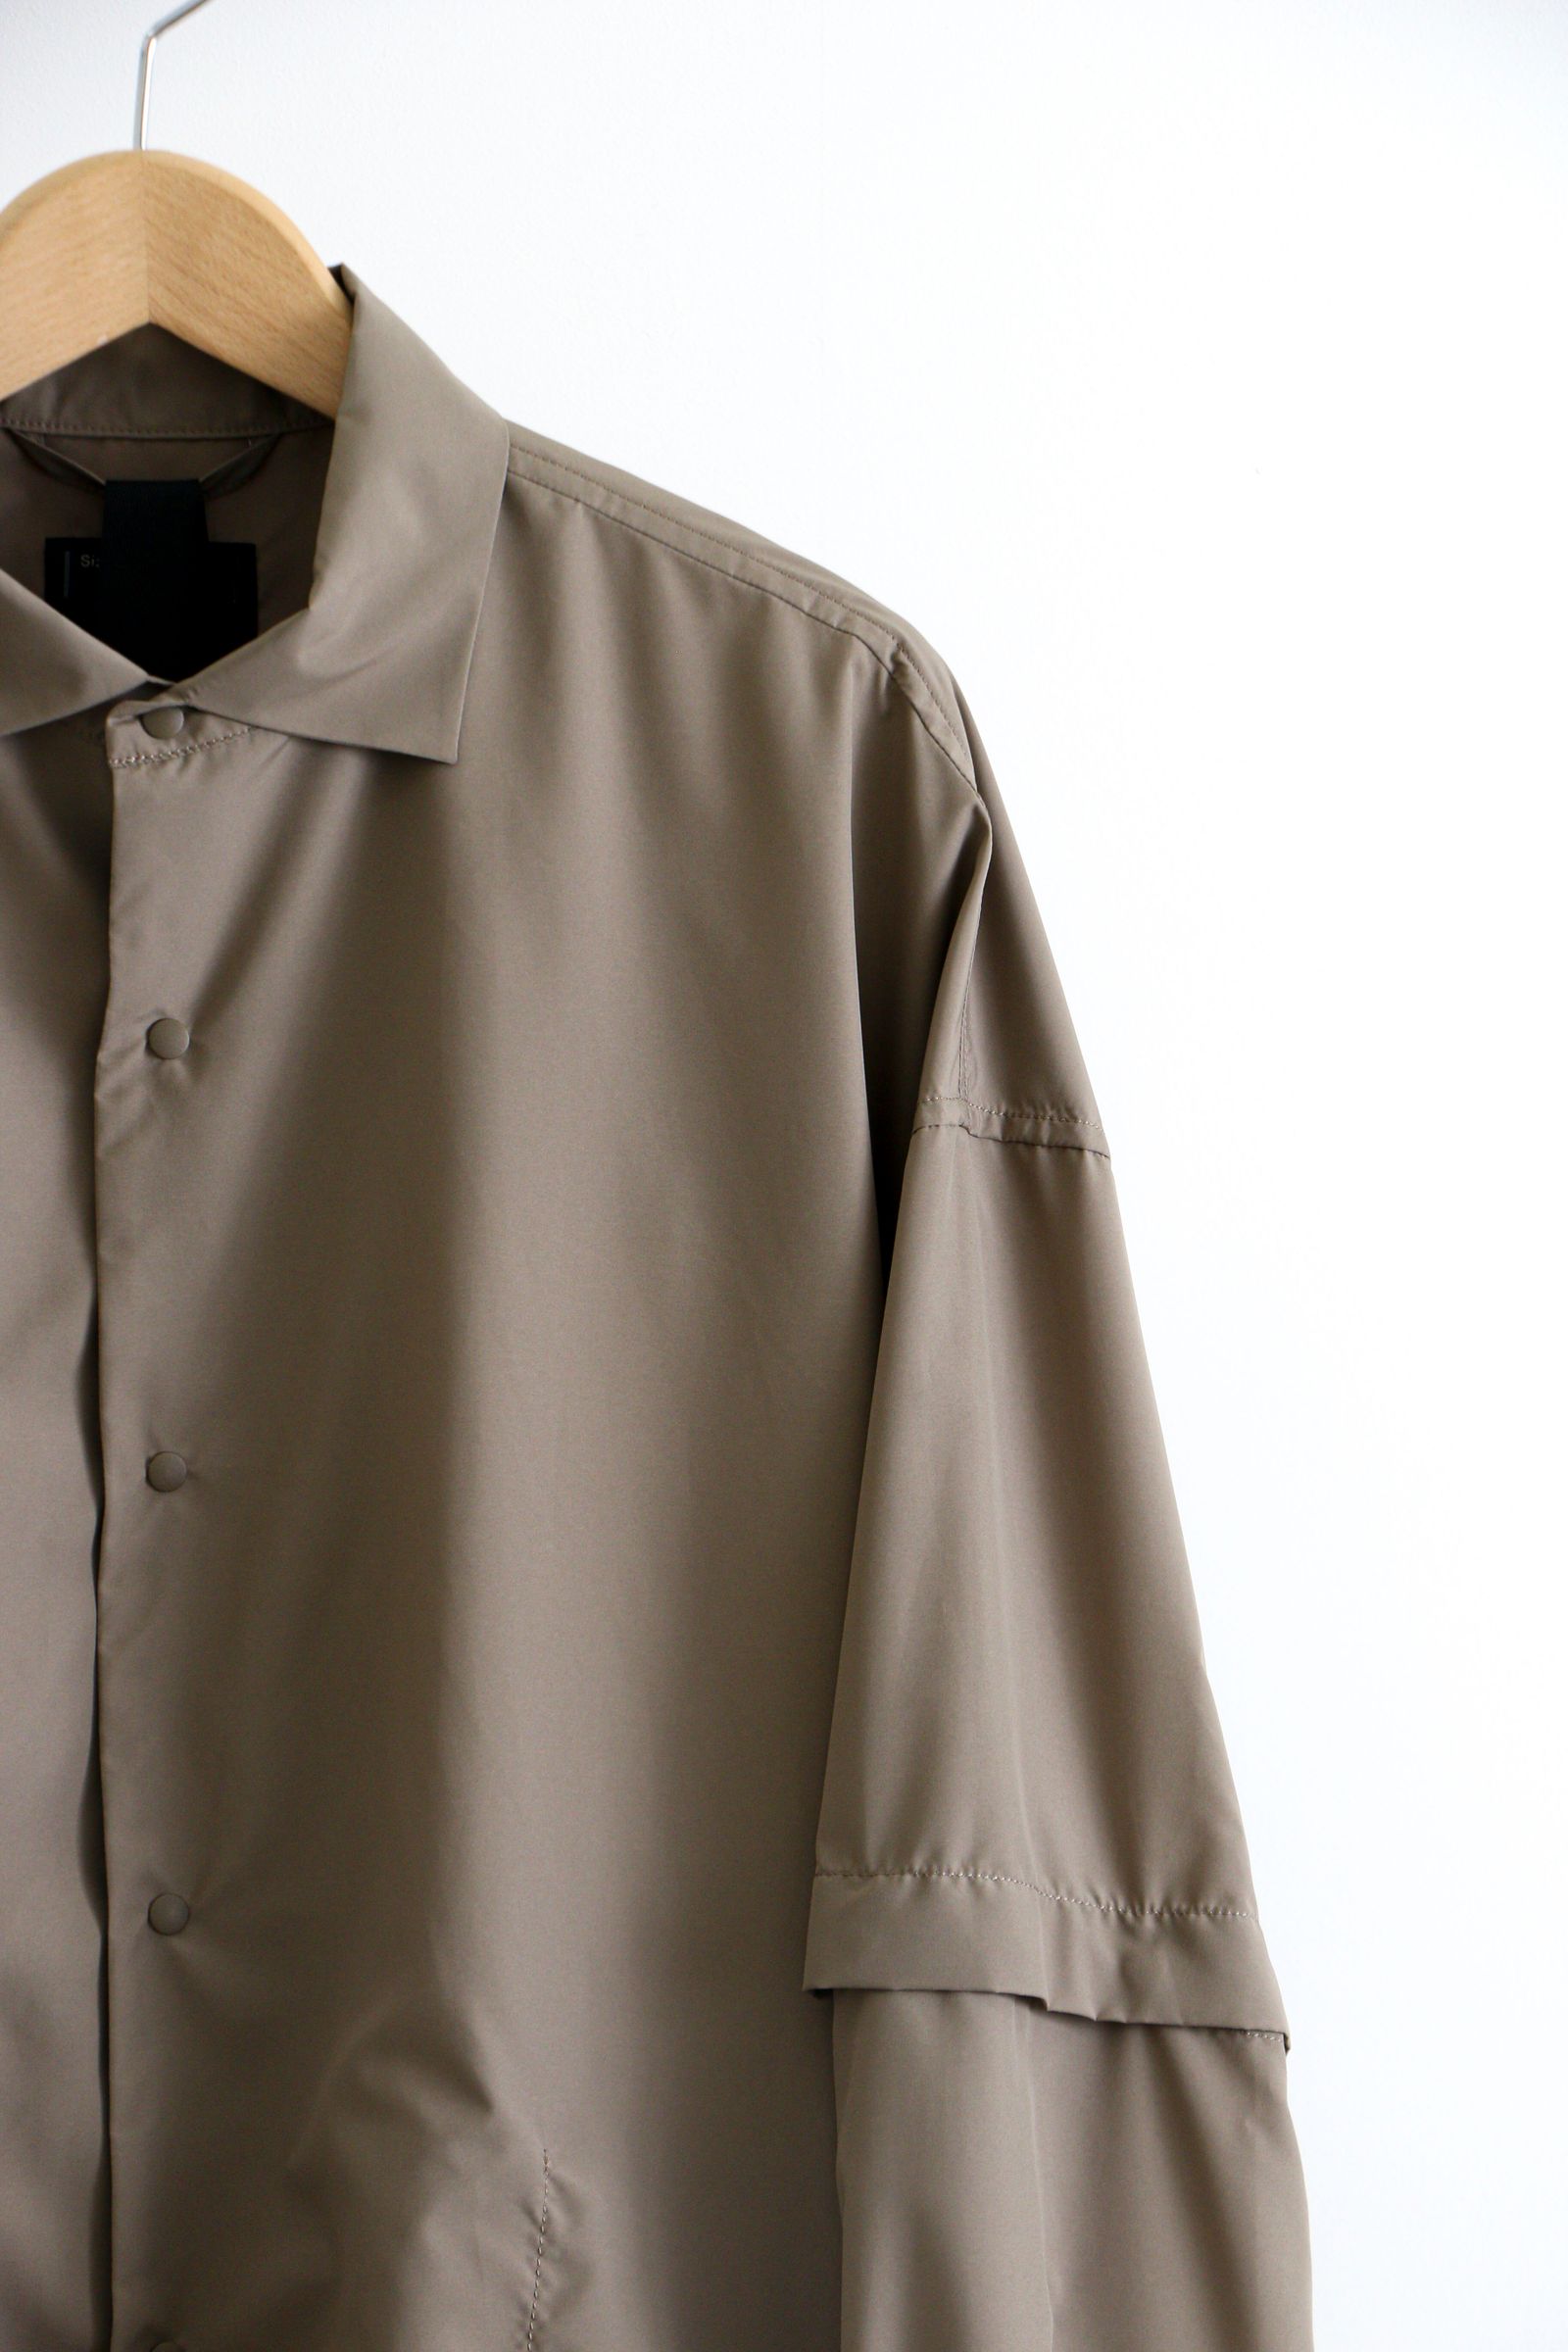 meanswhile - FEATHER SMOOTH SNAP SH TAUPE / 2Wayシャツ / ベージュ ...